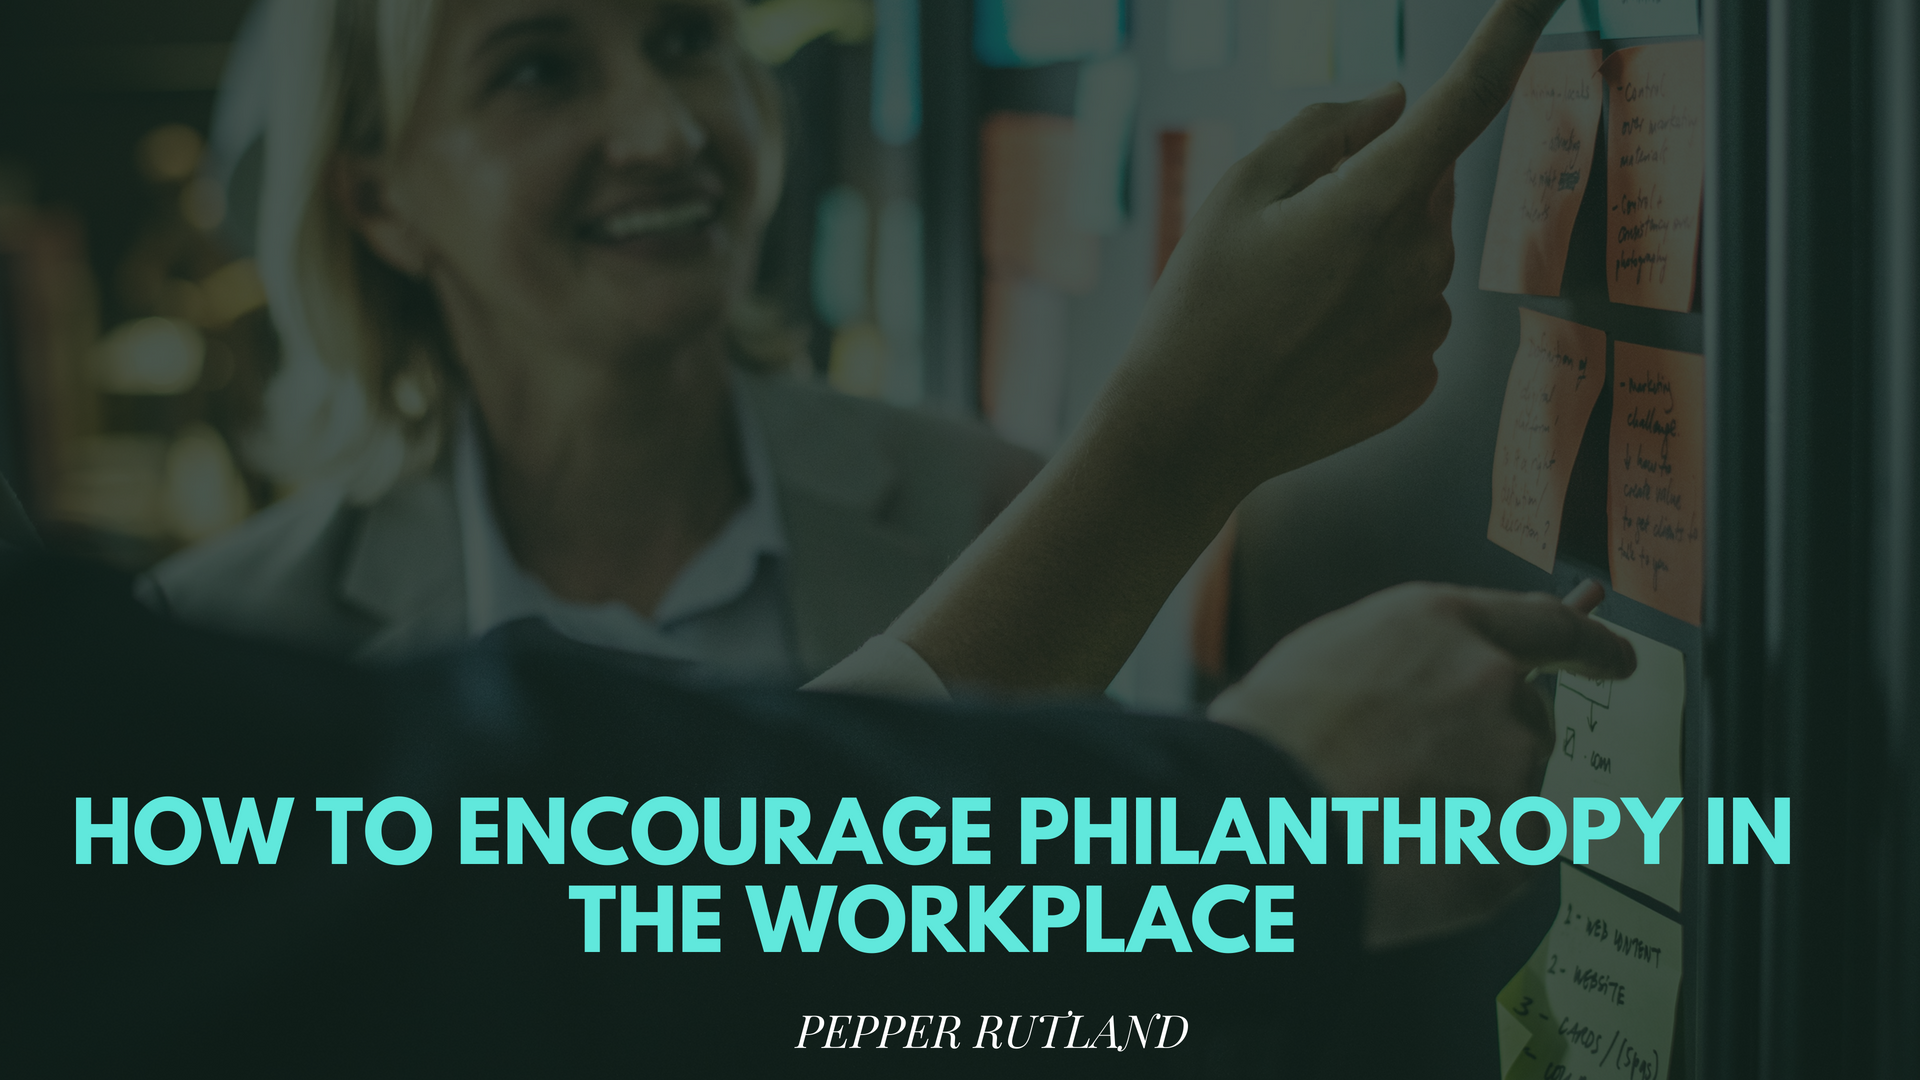 How to Encourage Philanthropy in the Workplace